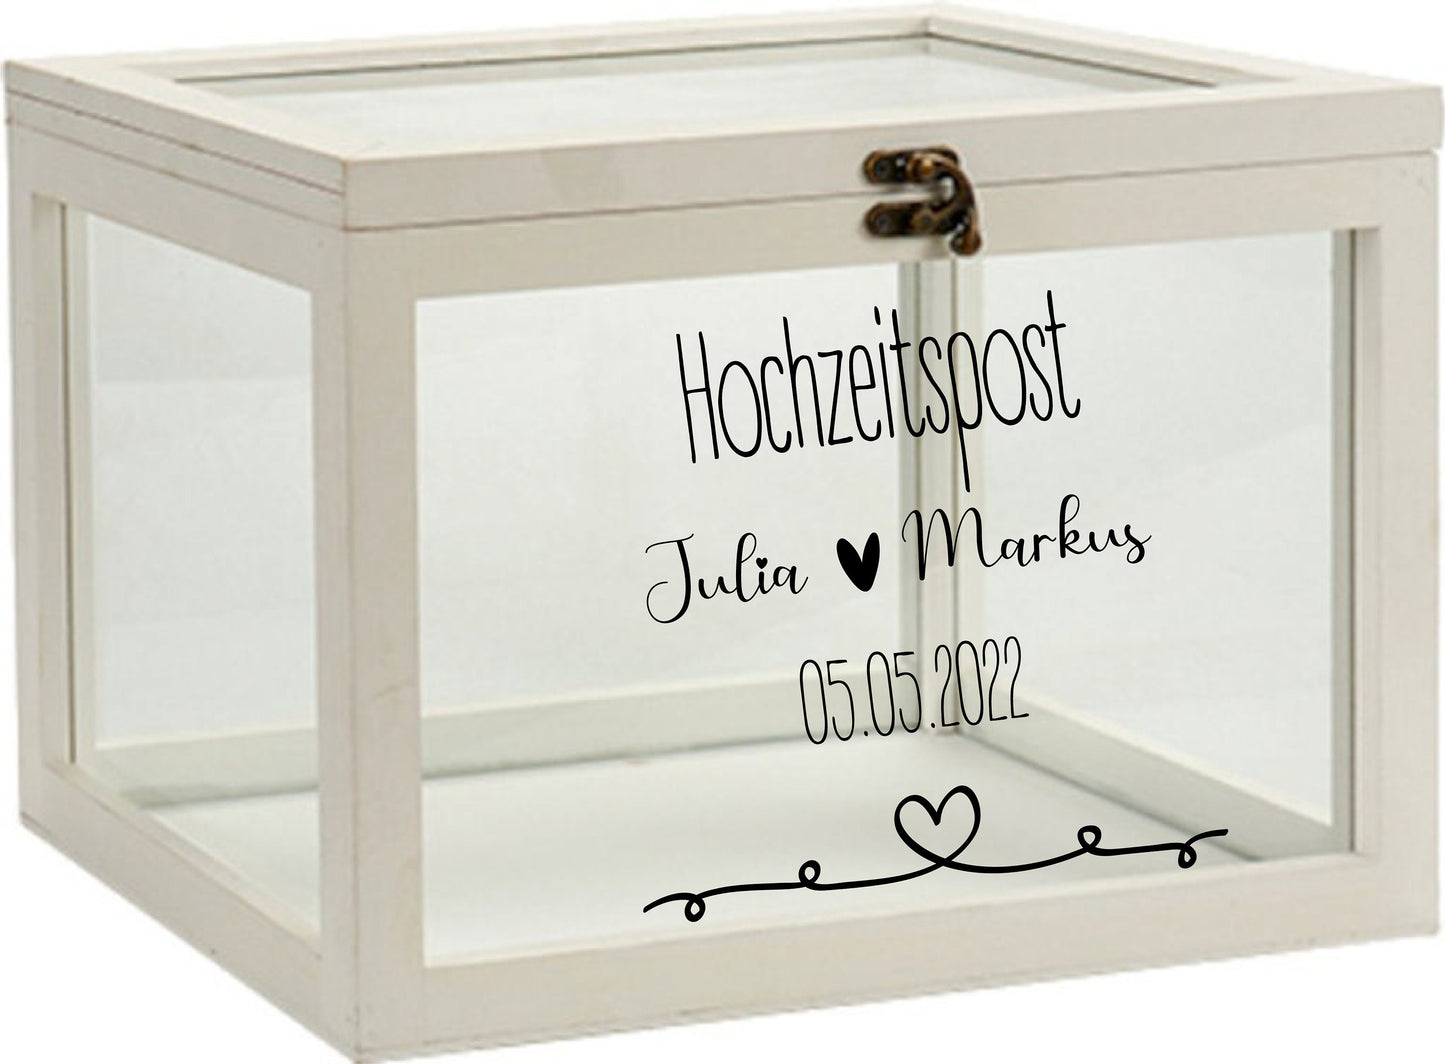 Sticker for wedding mail box for greenhouse money gifts and cards for wedding heart personalized